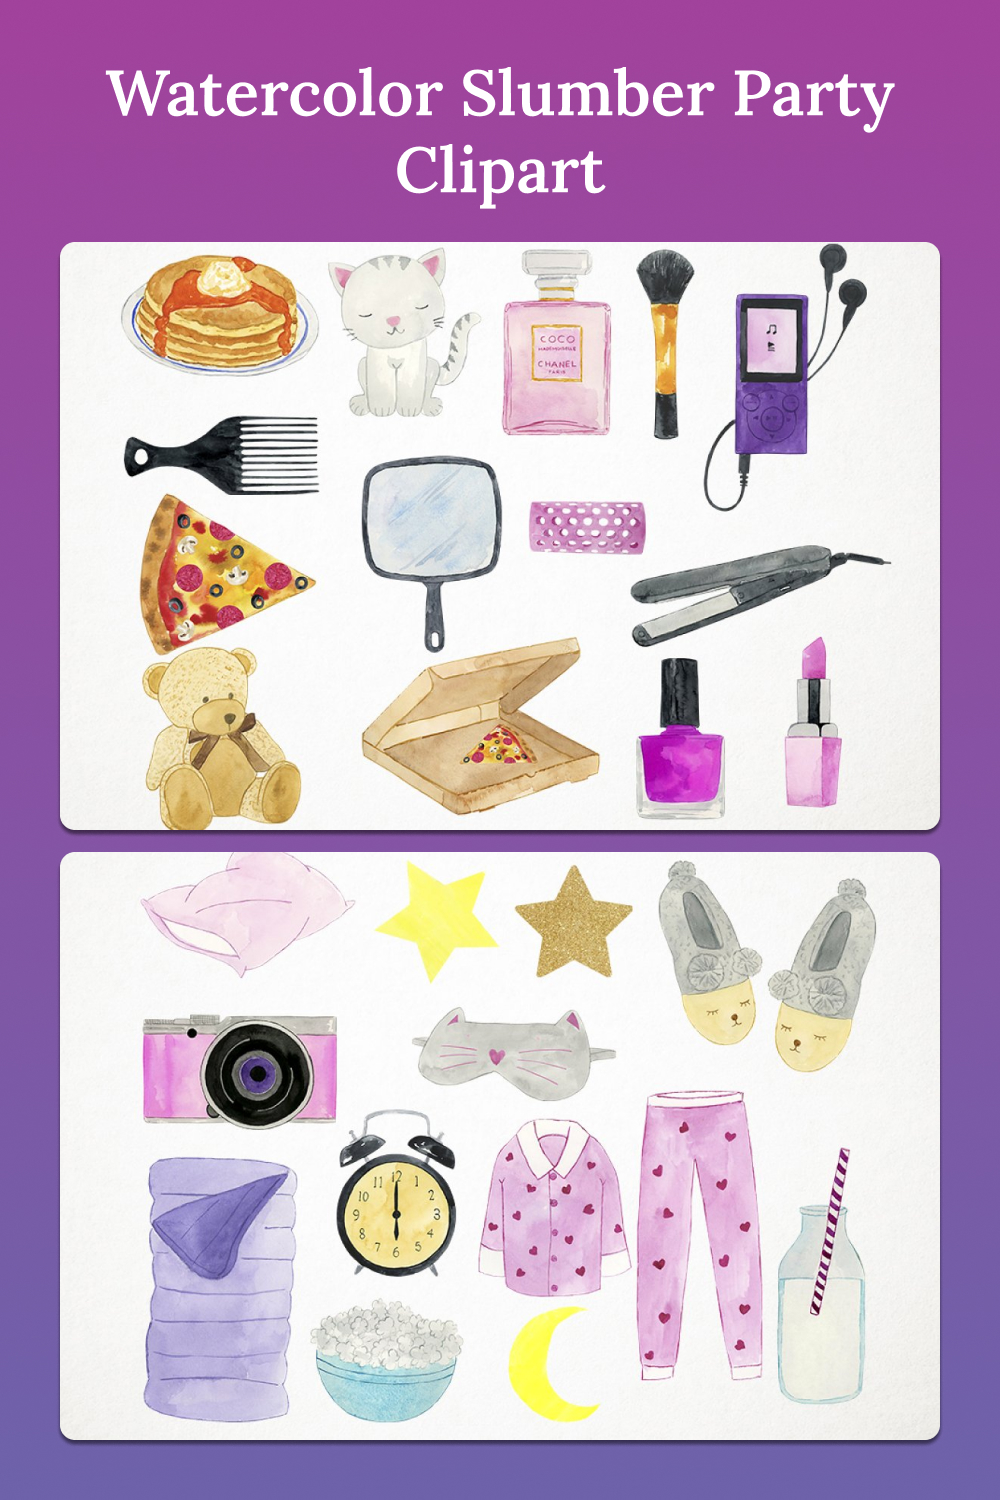 Watercolor slumber party clipart of pinterest.